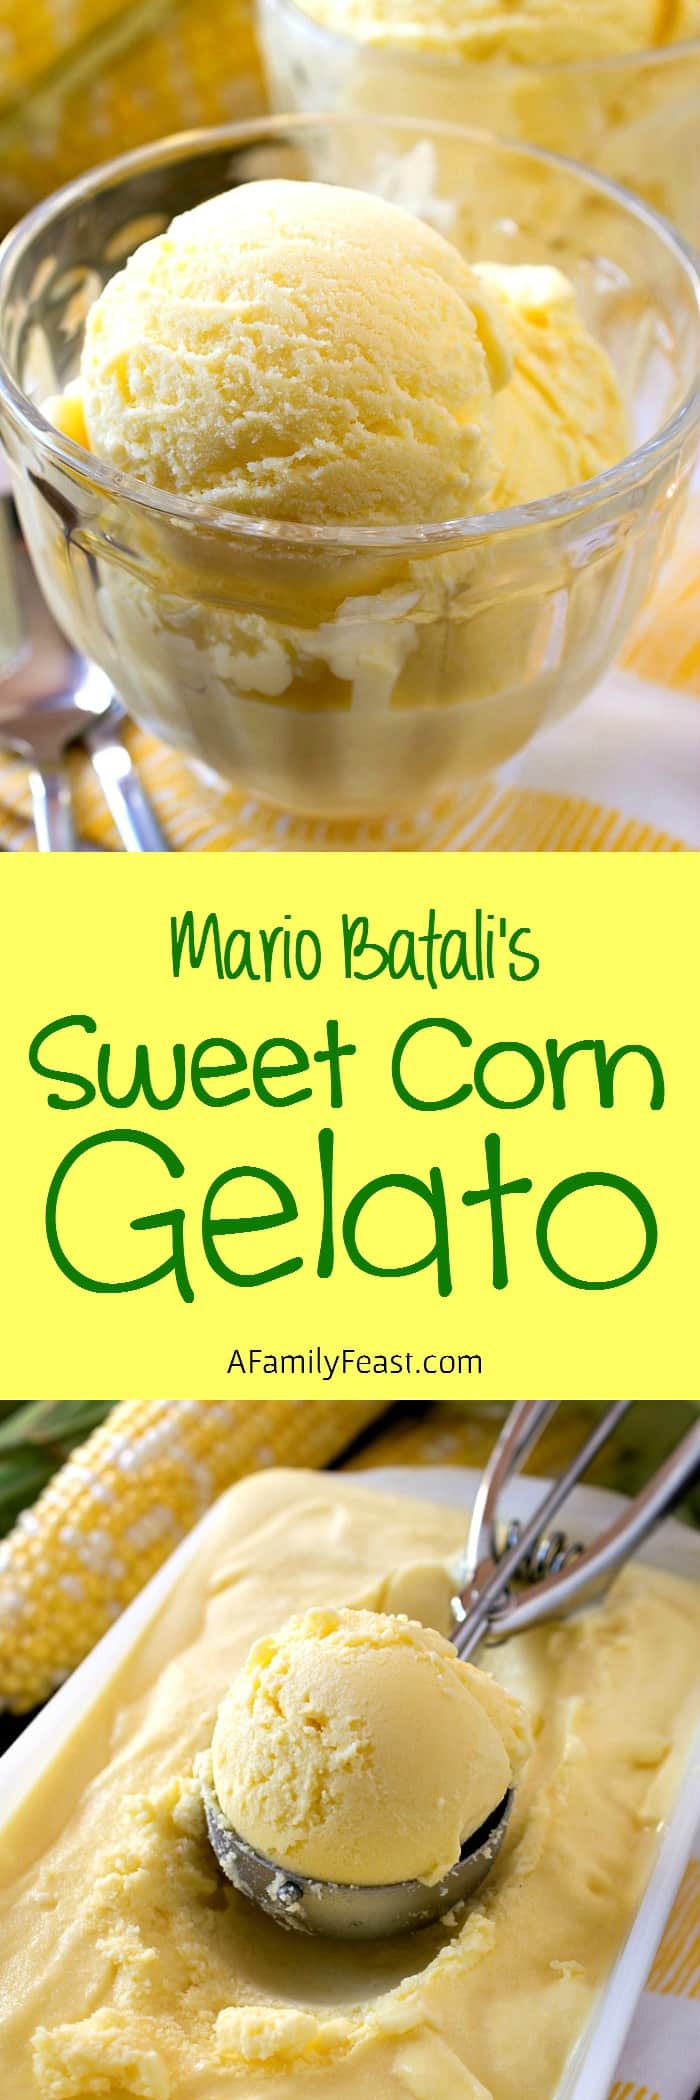 Sweet Corn Gelato - Adapted from a recipe by Mario Batali, this sweet corn gelato is a delicious taste of summer!